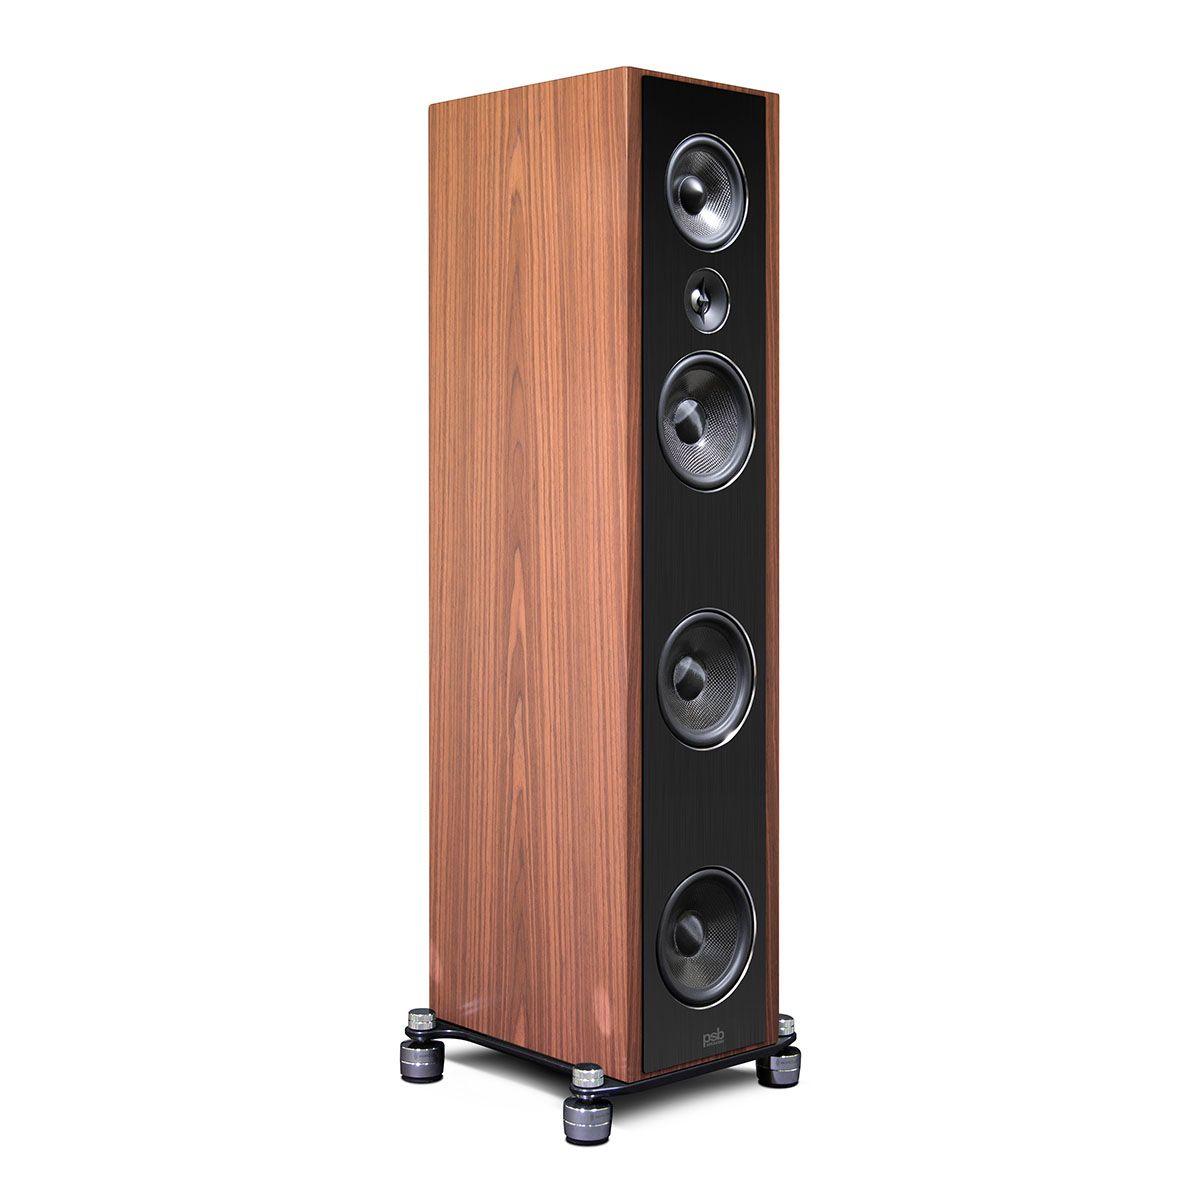 PSB Synchrony T600 Premium Tower Speaker - Walnut - single angled front view